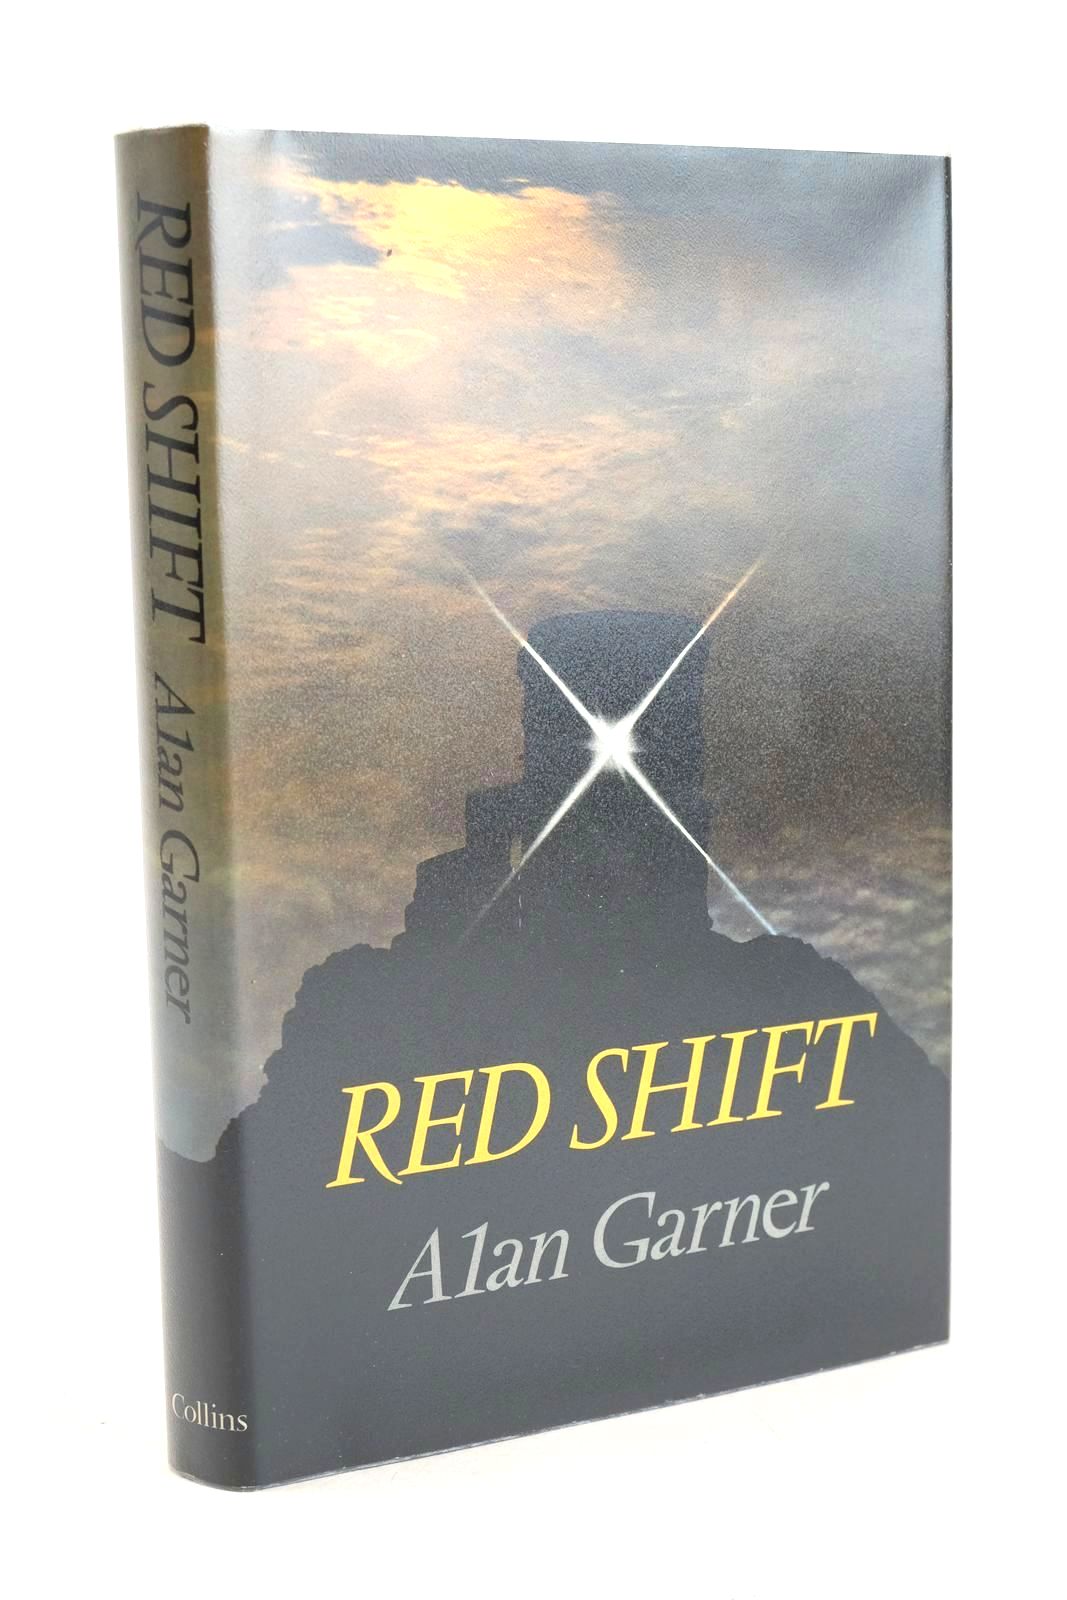 Photo of RED SHIFT written by Garner, Alan published by Collins (STOCK CODE: 1328000)  for sale by Stella & Rose's Books